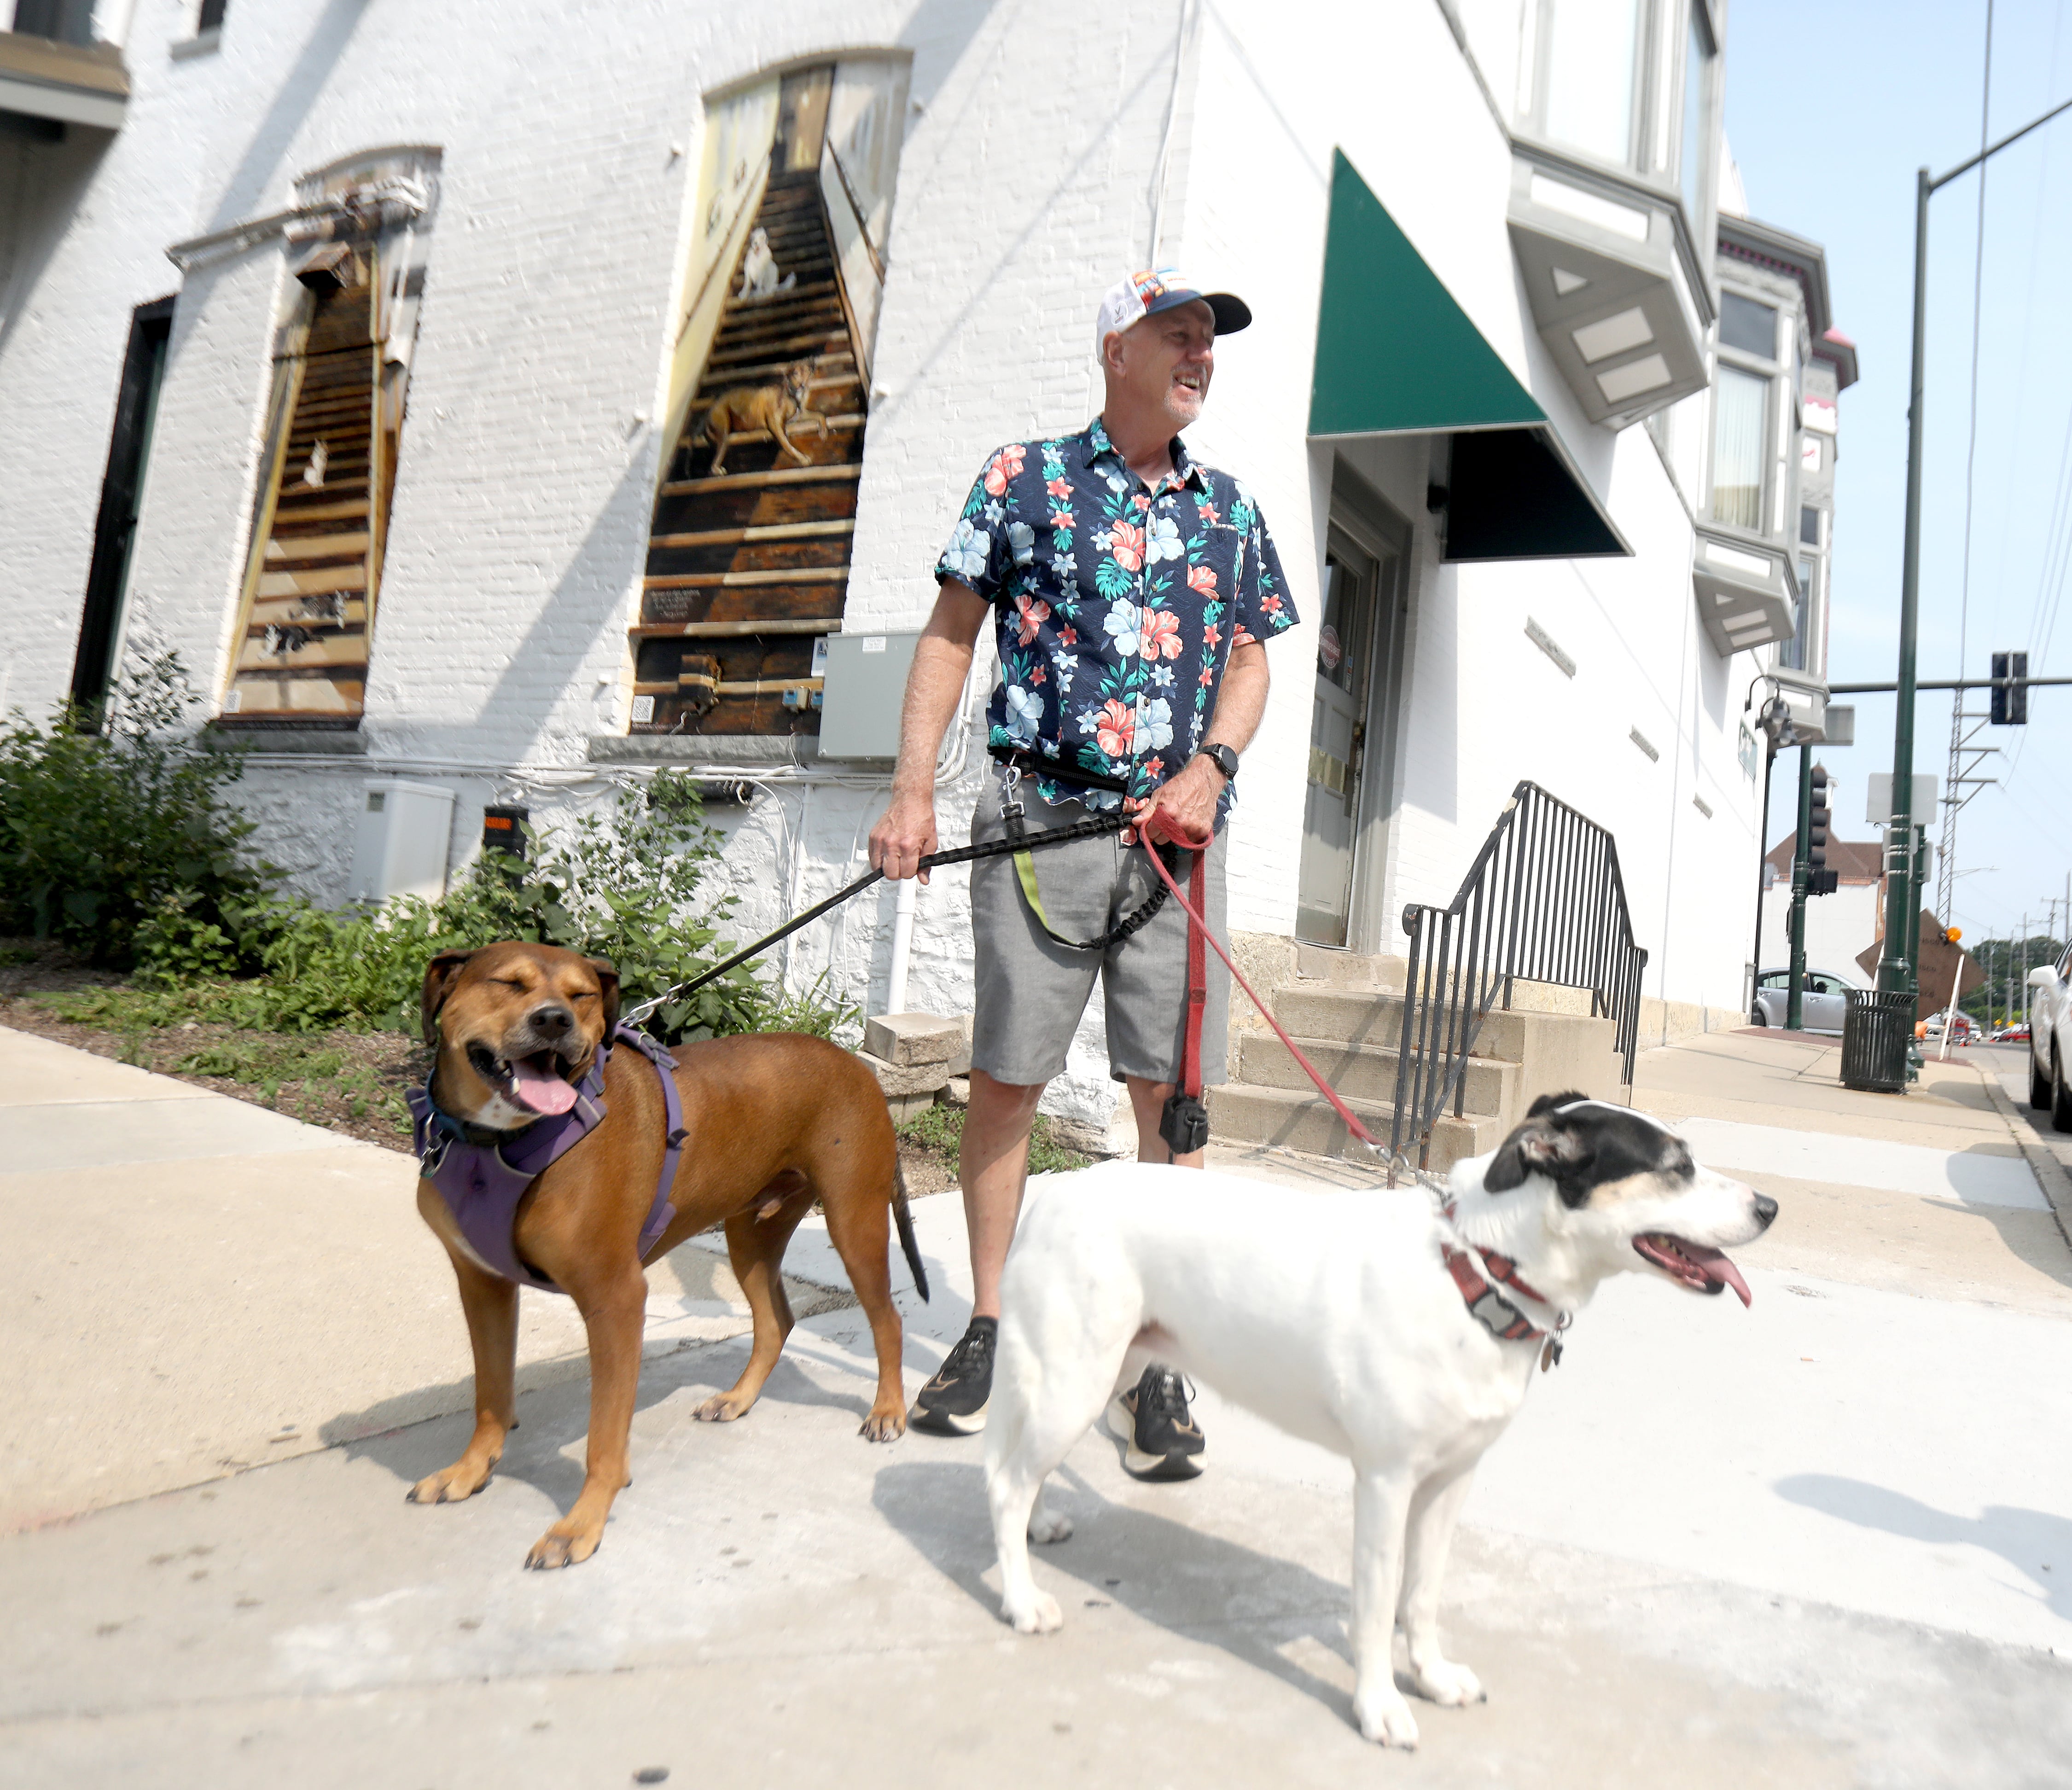 New Murals in St. Charles encourage support for local animal rescues